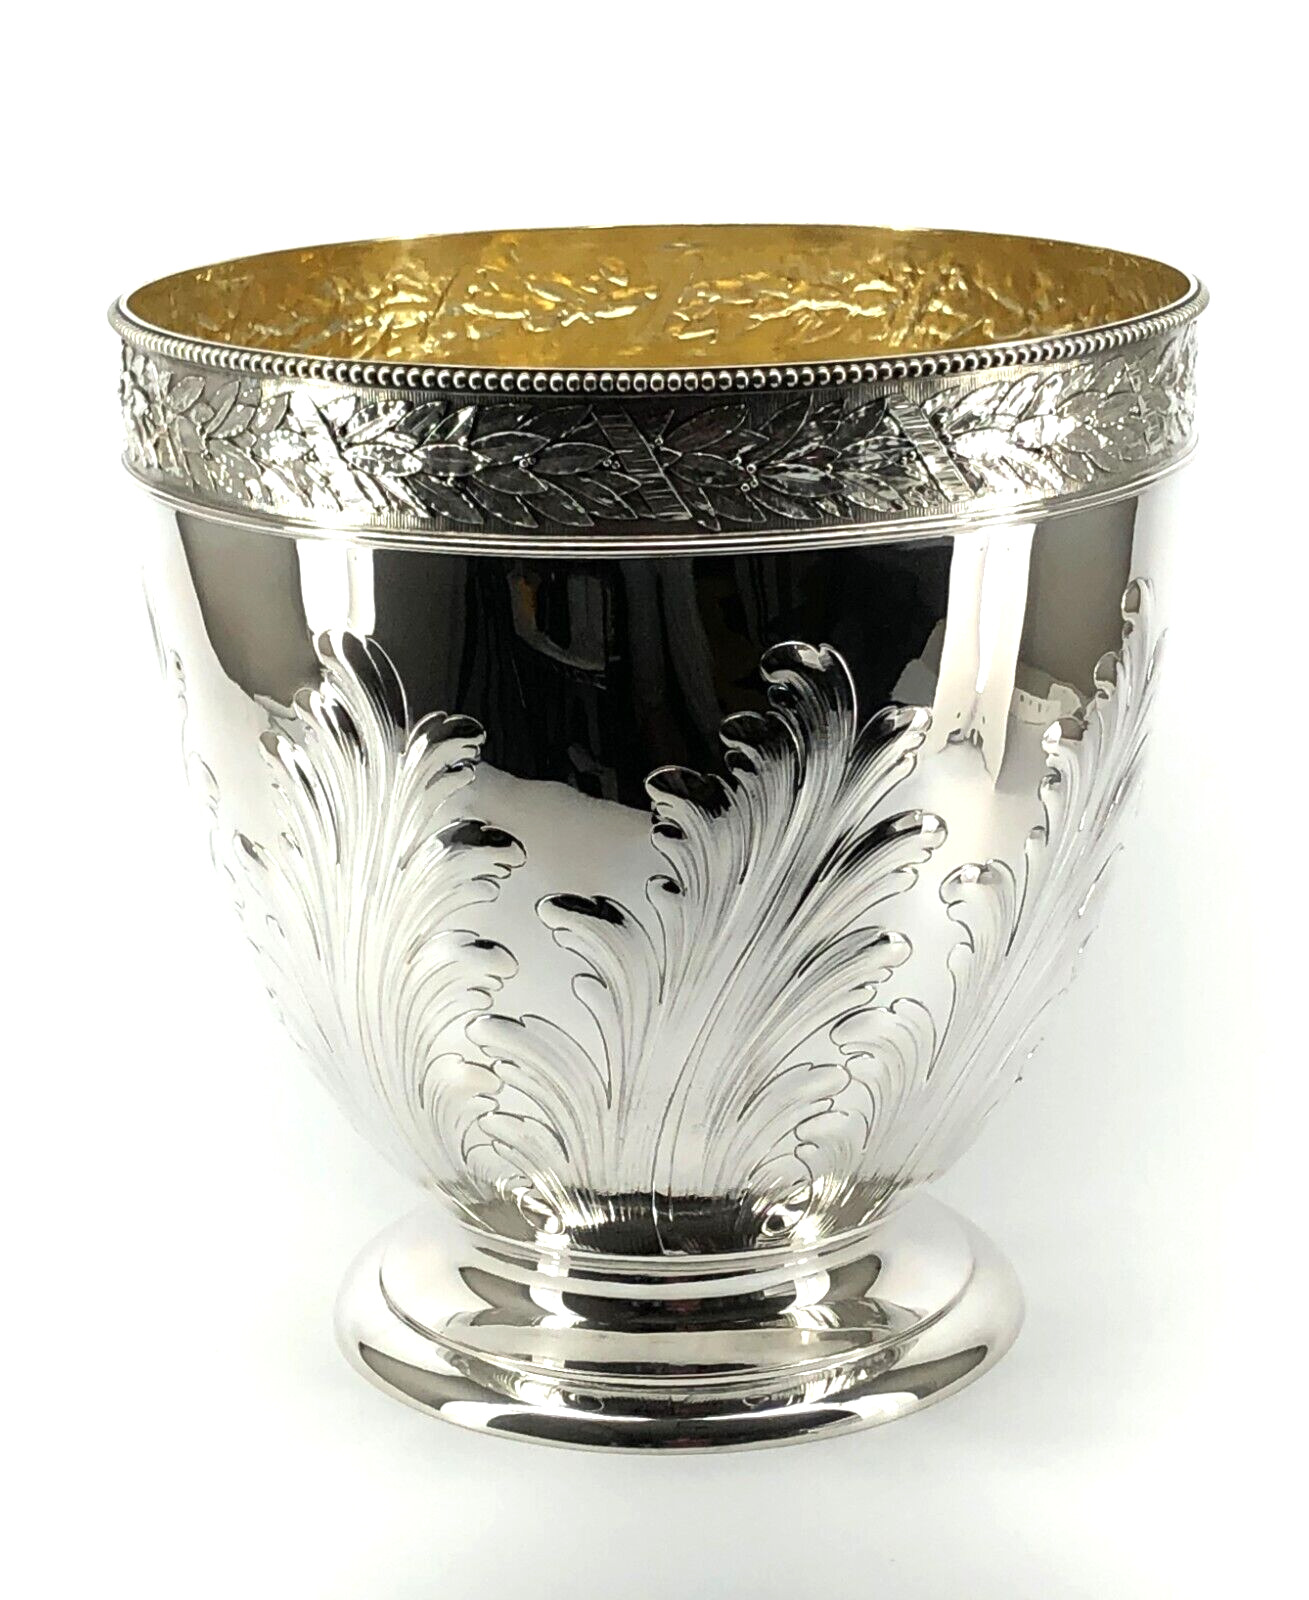 Stunning large Magnum Ice / Champagne Bucket made out of 800 fine Silver